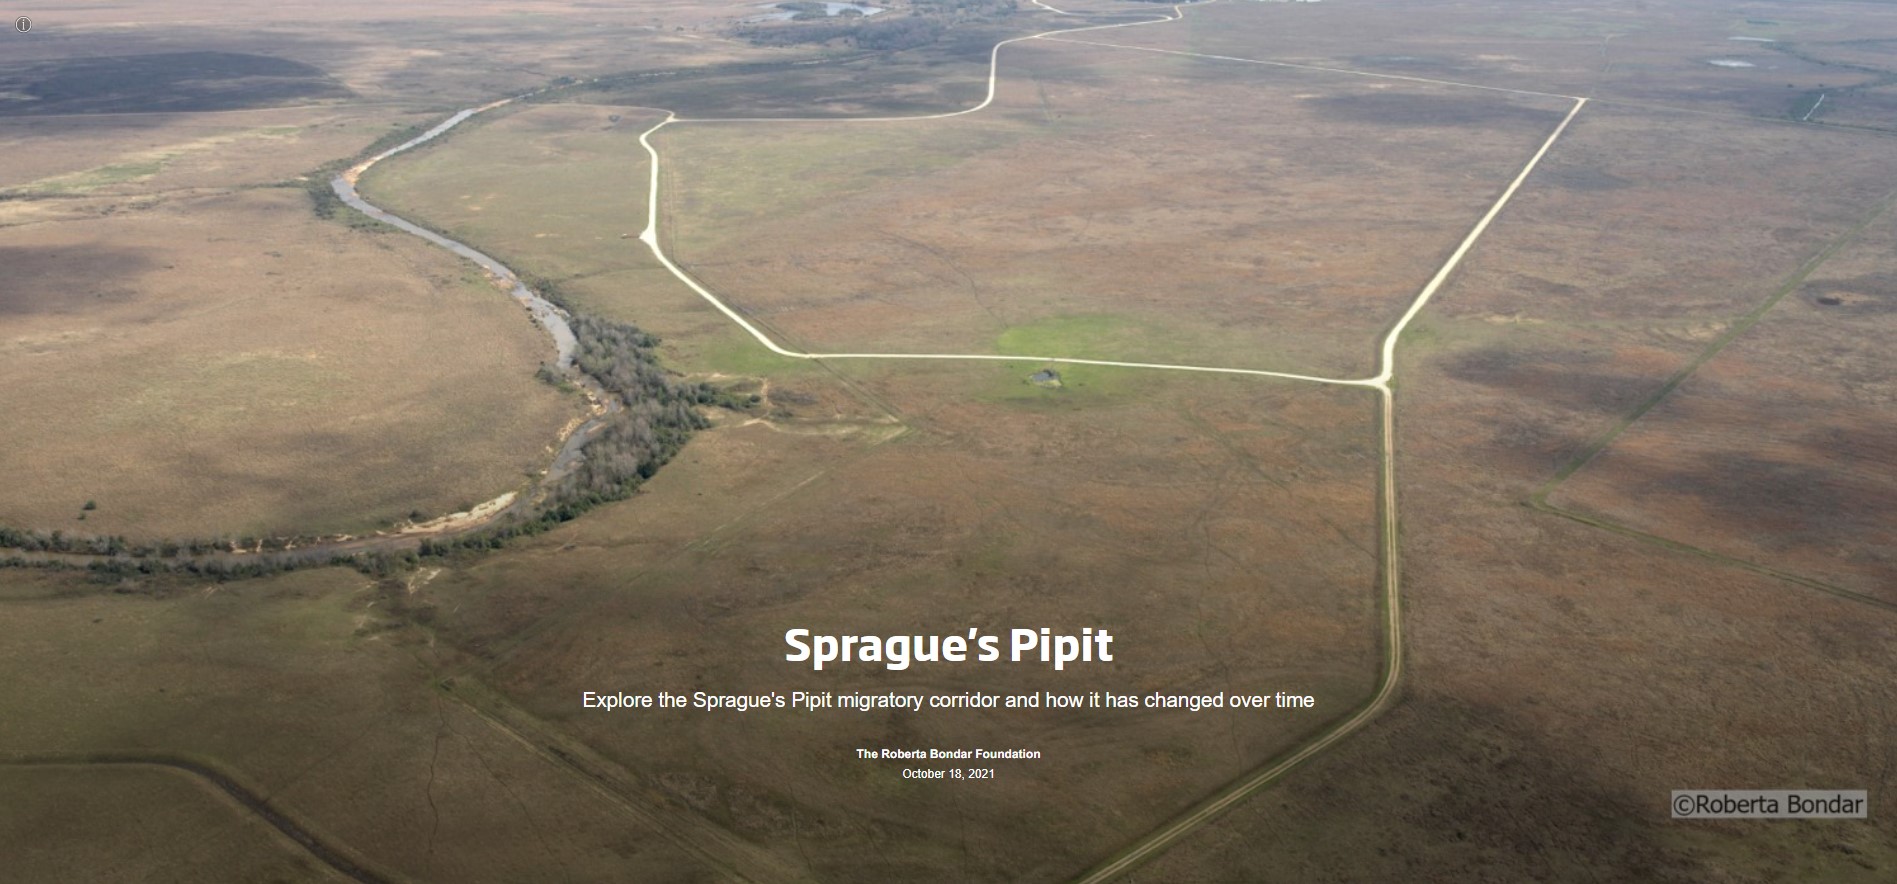 Slide with text Sprague's Pipit and an aerial photo of grasslands with roads cutting through